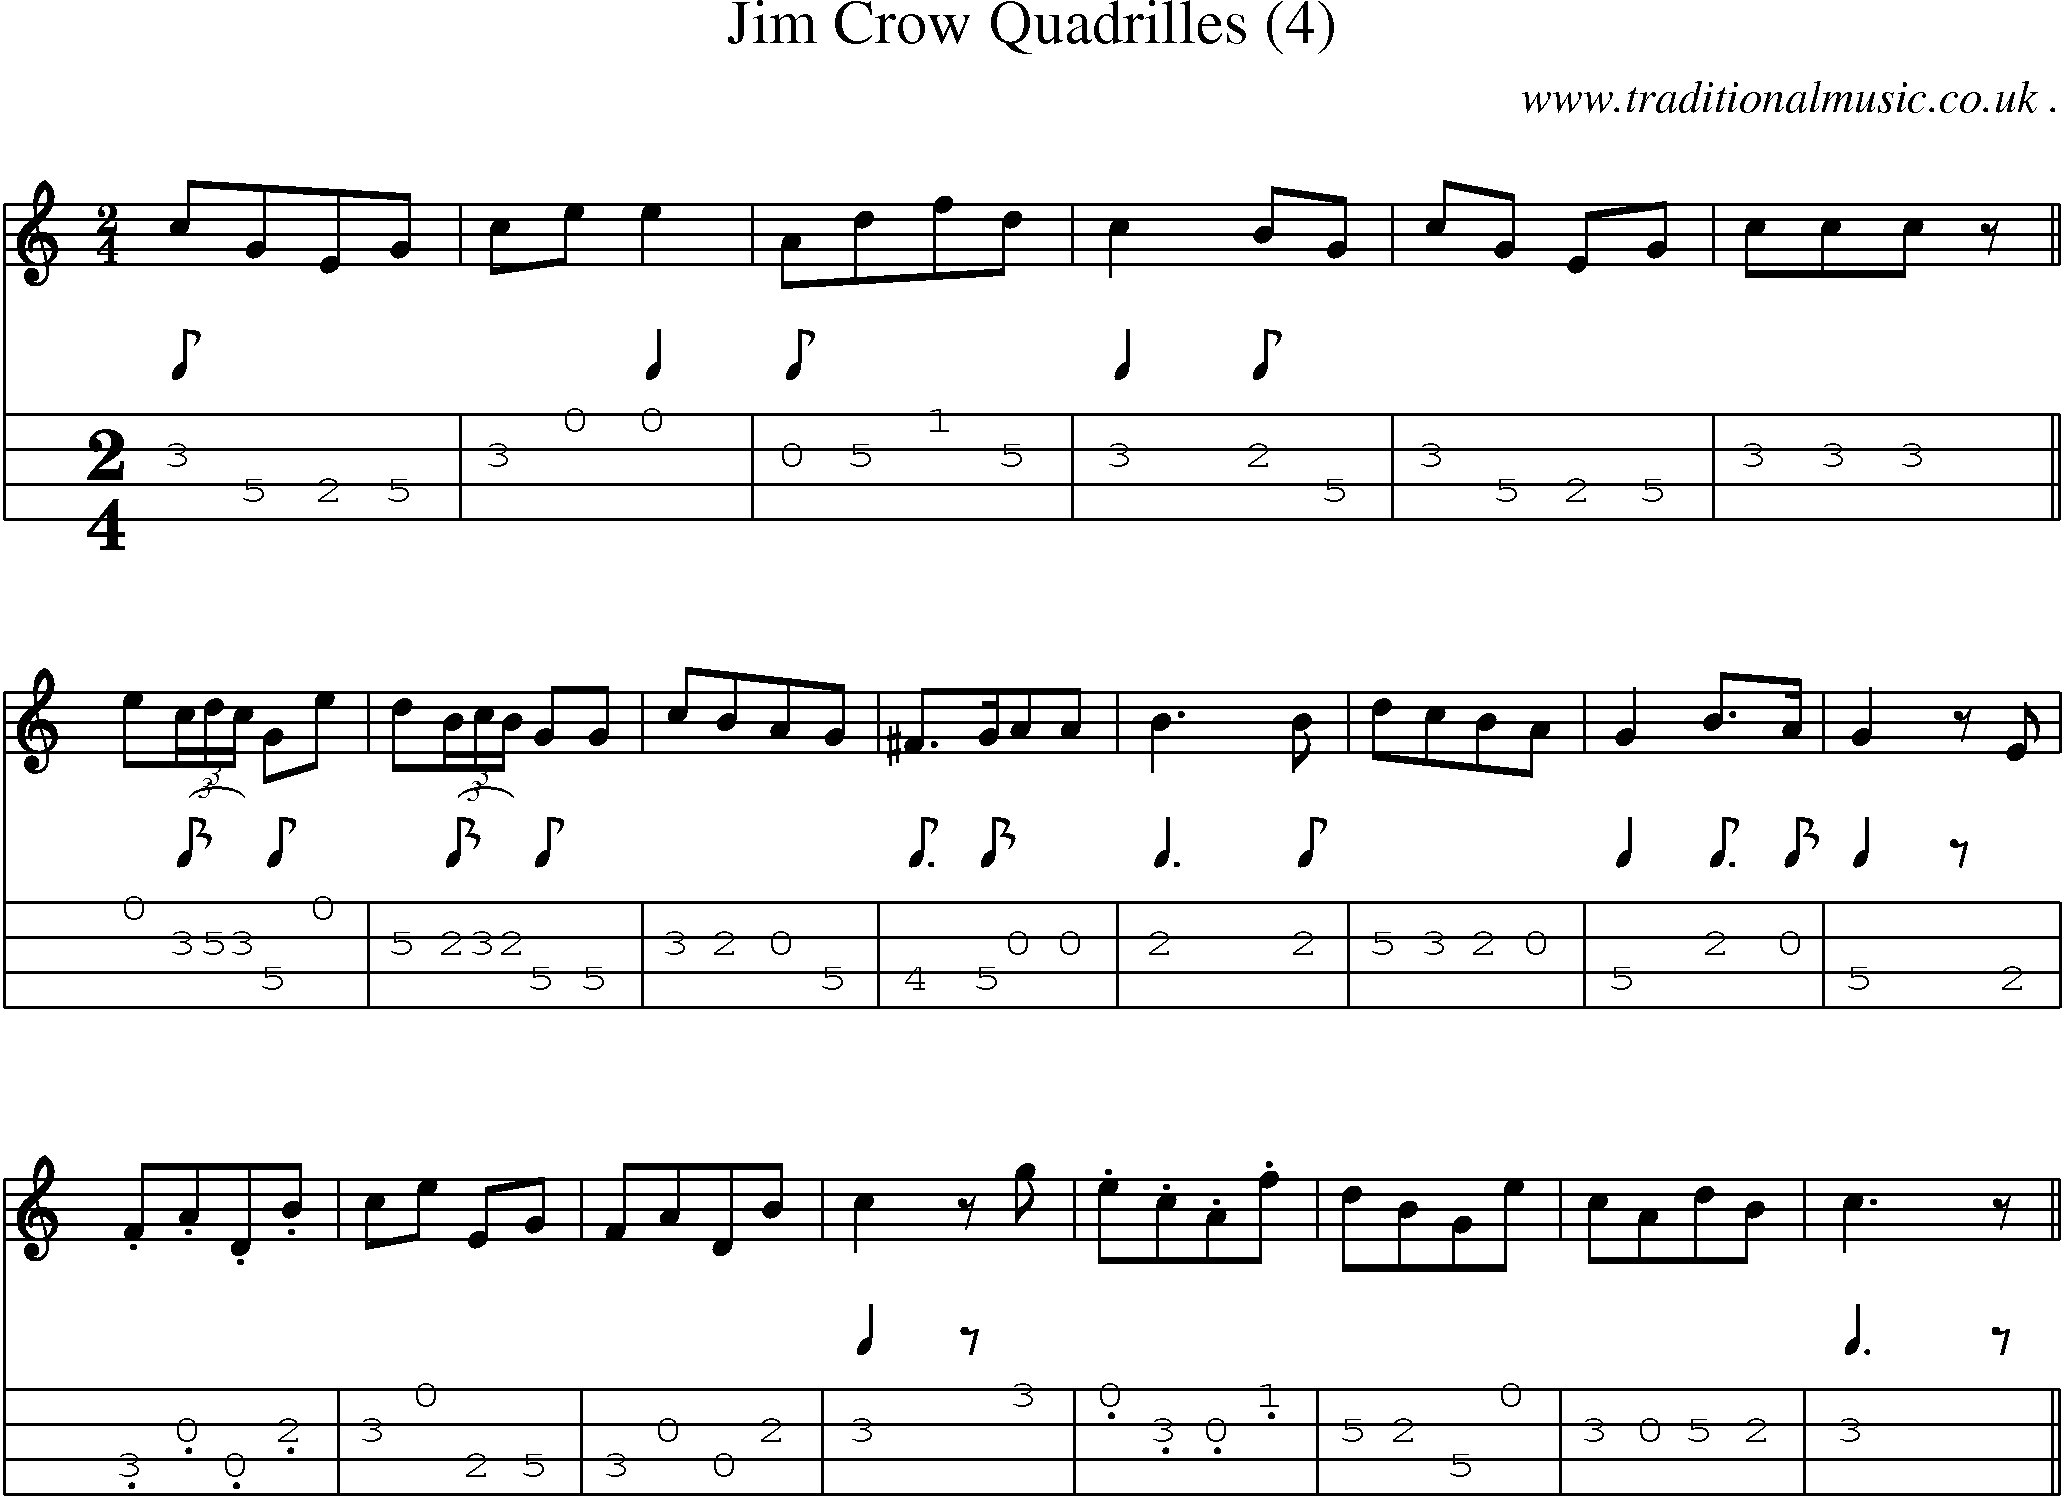 Sheet-Music and Mandolin Tabs for Jim Crow Quadrilles (4)